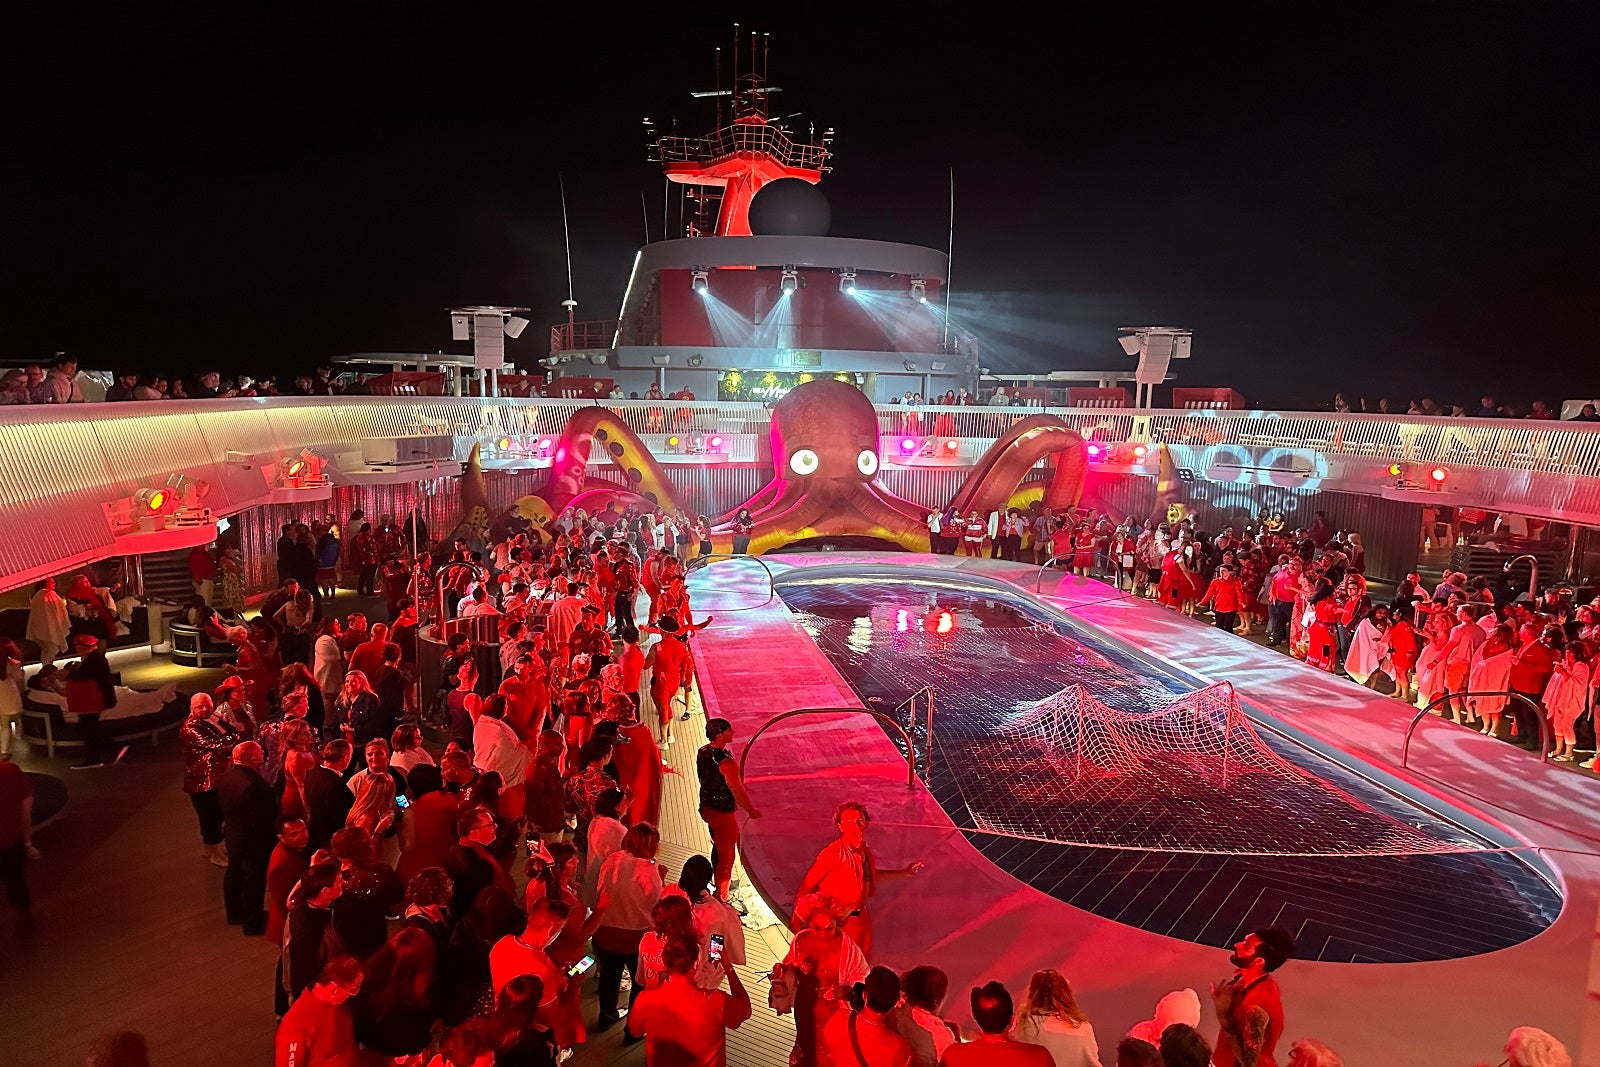 Passengers crowd around the pool for a rave-style Scarlet Night party on Virgin Voyages' Resilient Lady.